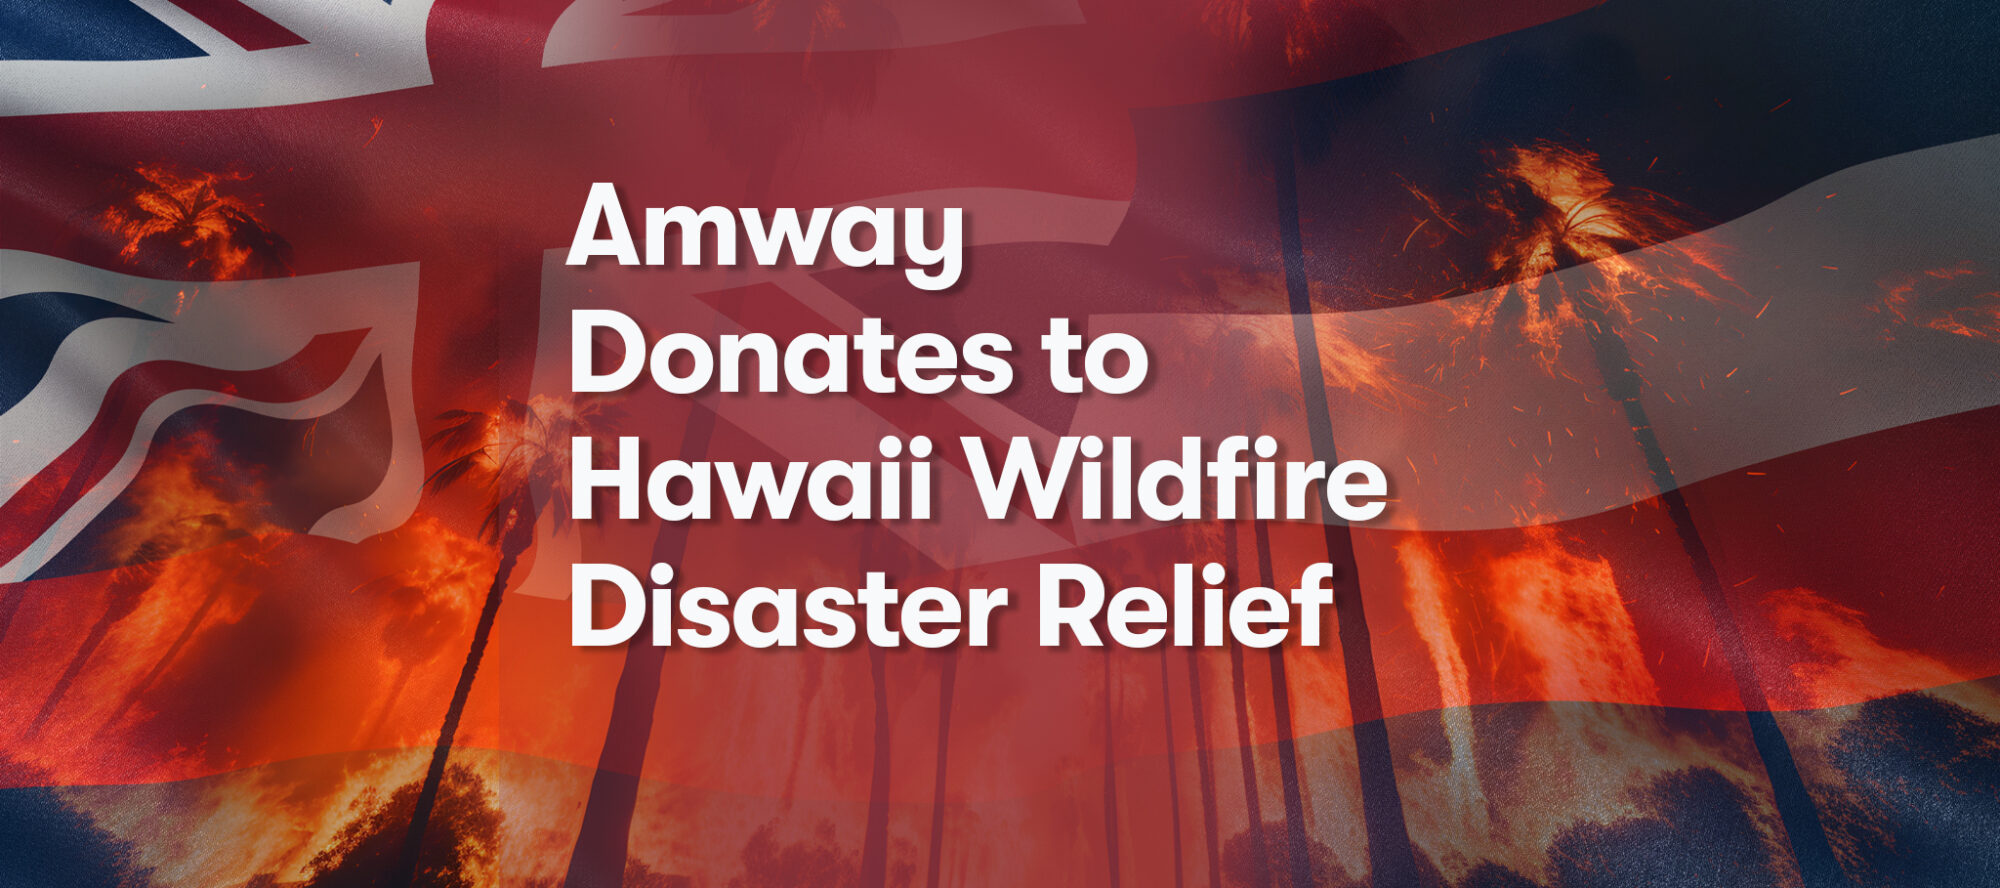 Amway Donates to Hawaii Wildfire Disaster Relief